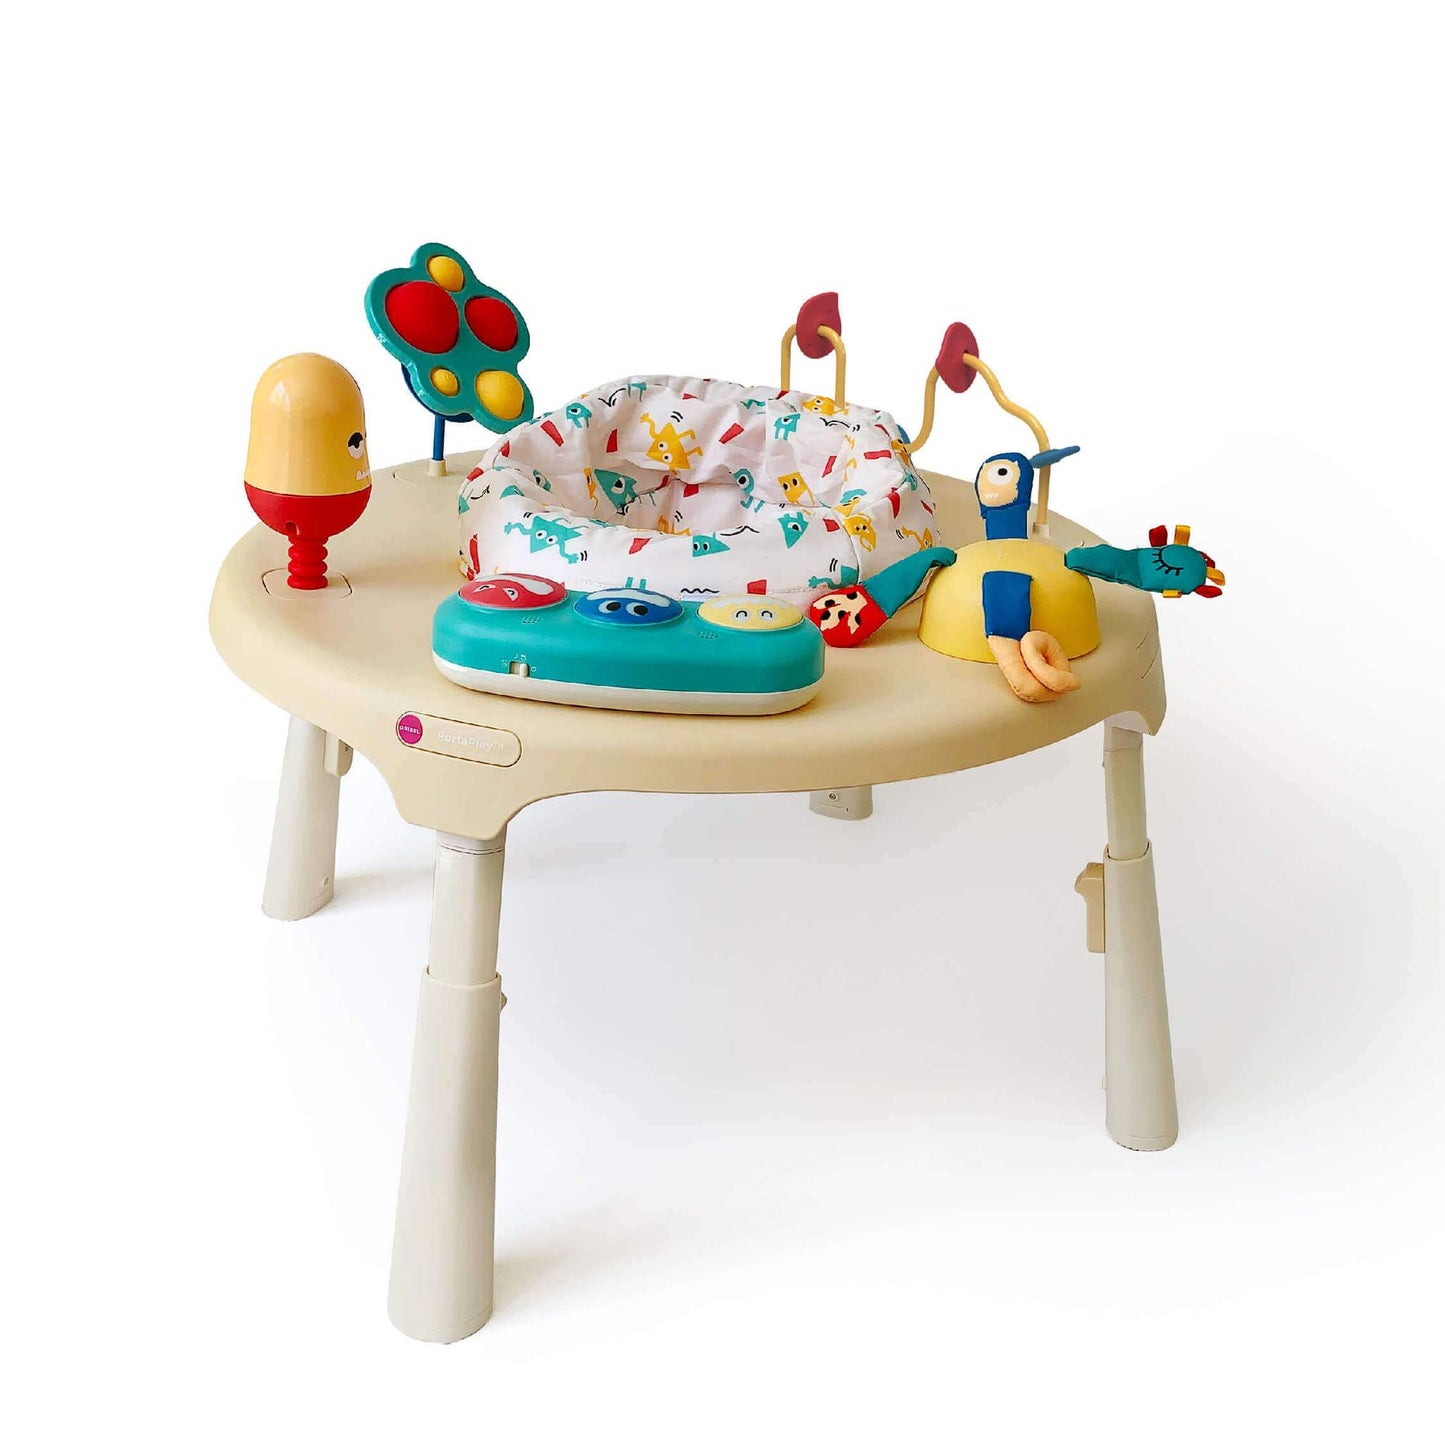 Oribel PortaPlay Convertible Activity Center - Monsterland Adventures (without Stools)